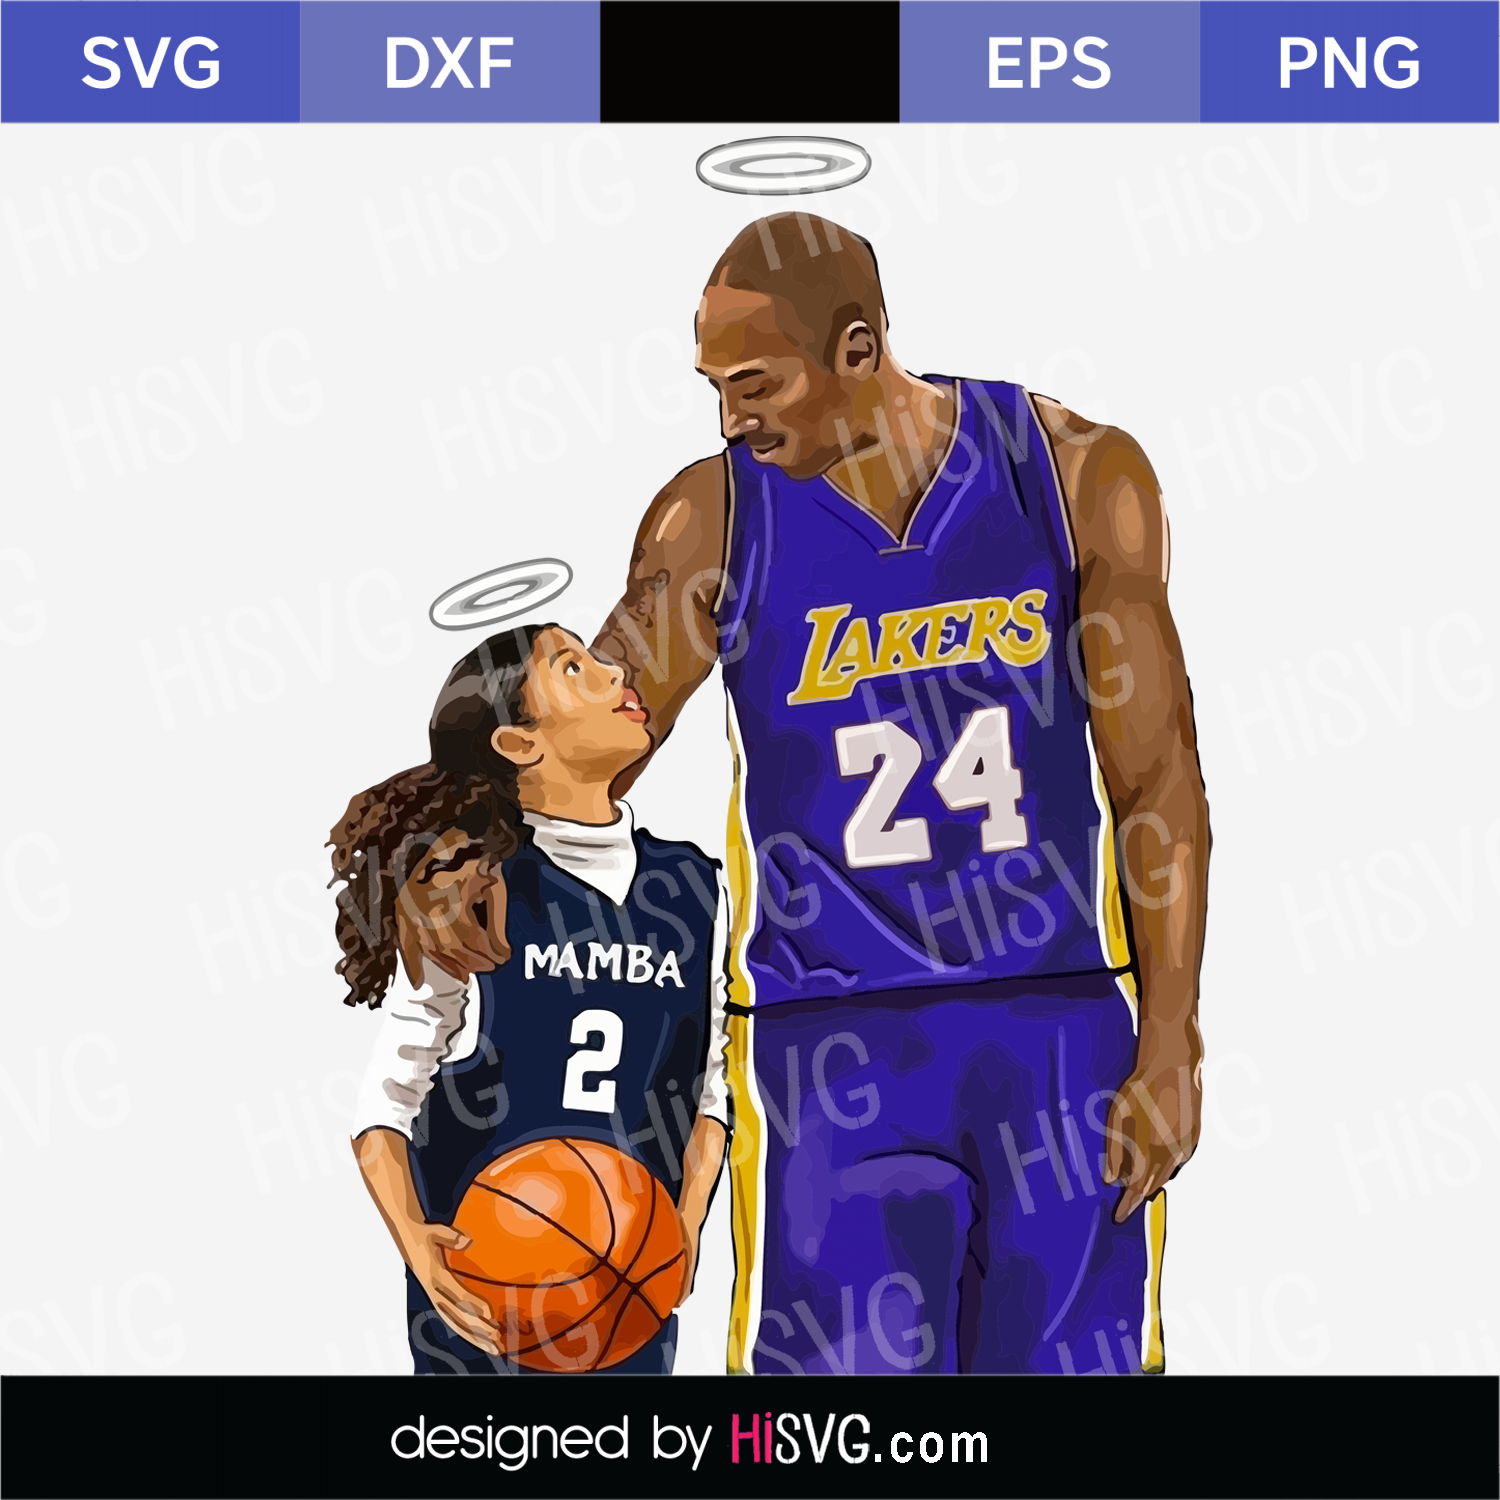 Download Kobe Bryant Gigi 24 8 Svg Png Jpg Download Autograph Los Angeles Lakers Basketball Player Silhouette Graphic Vector Cameo Files Court Hisvg Com Free Svg Cut Files Hisvg Com Free